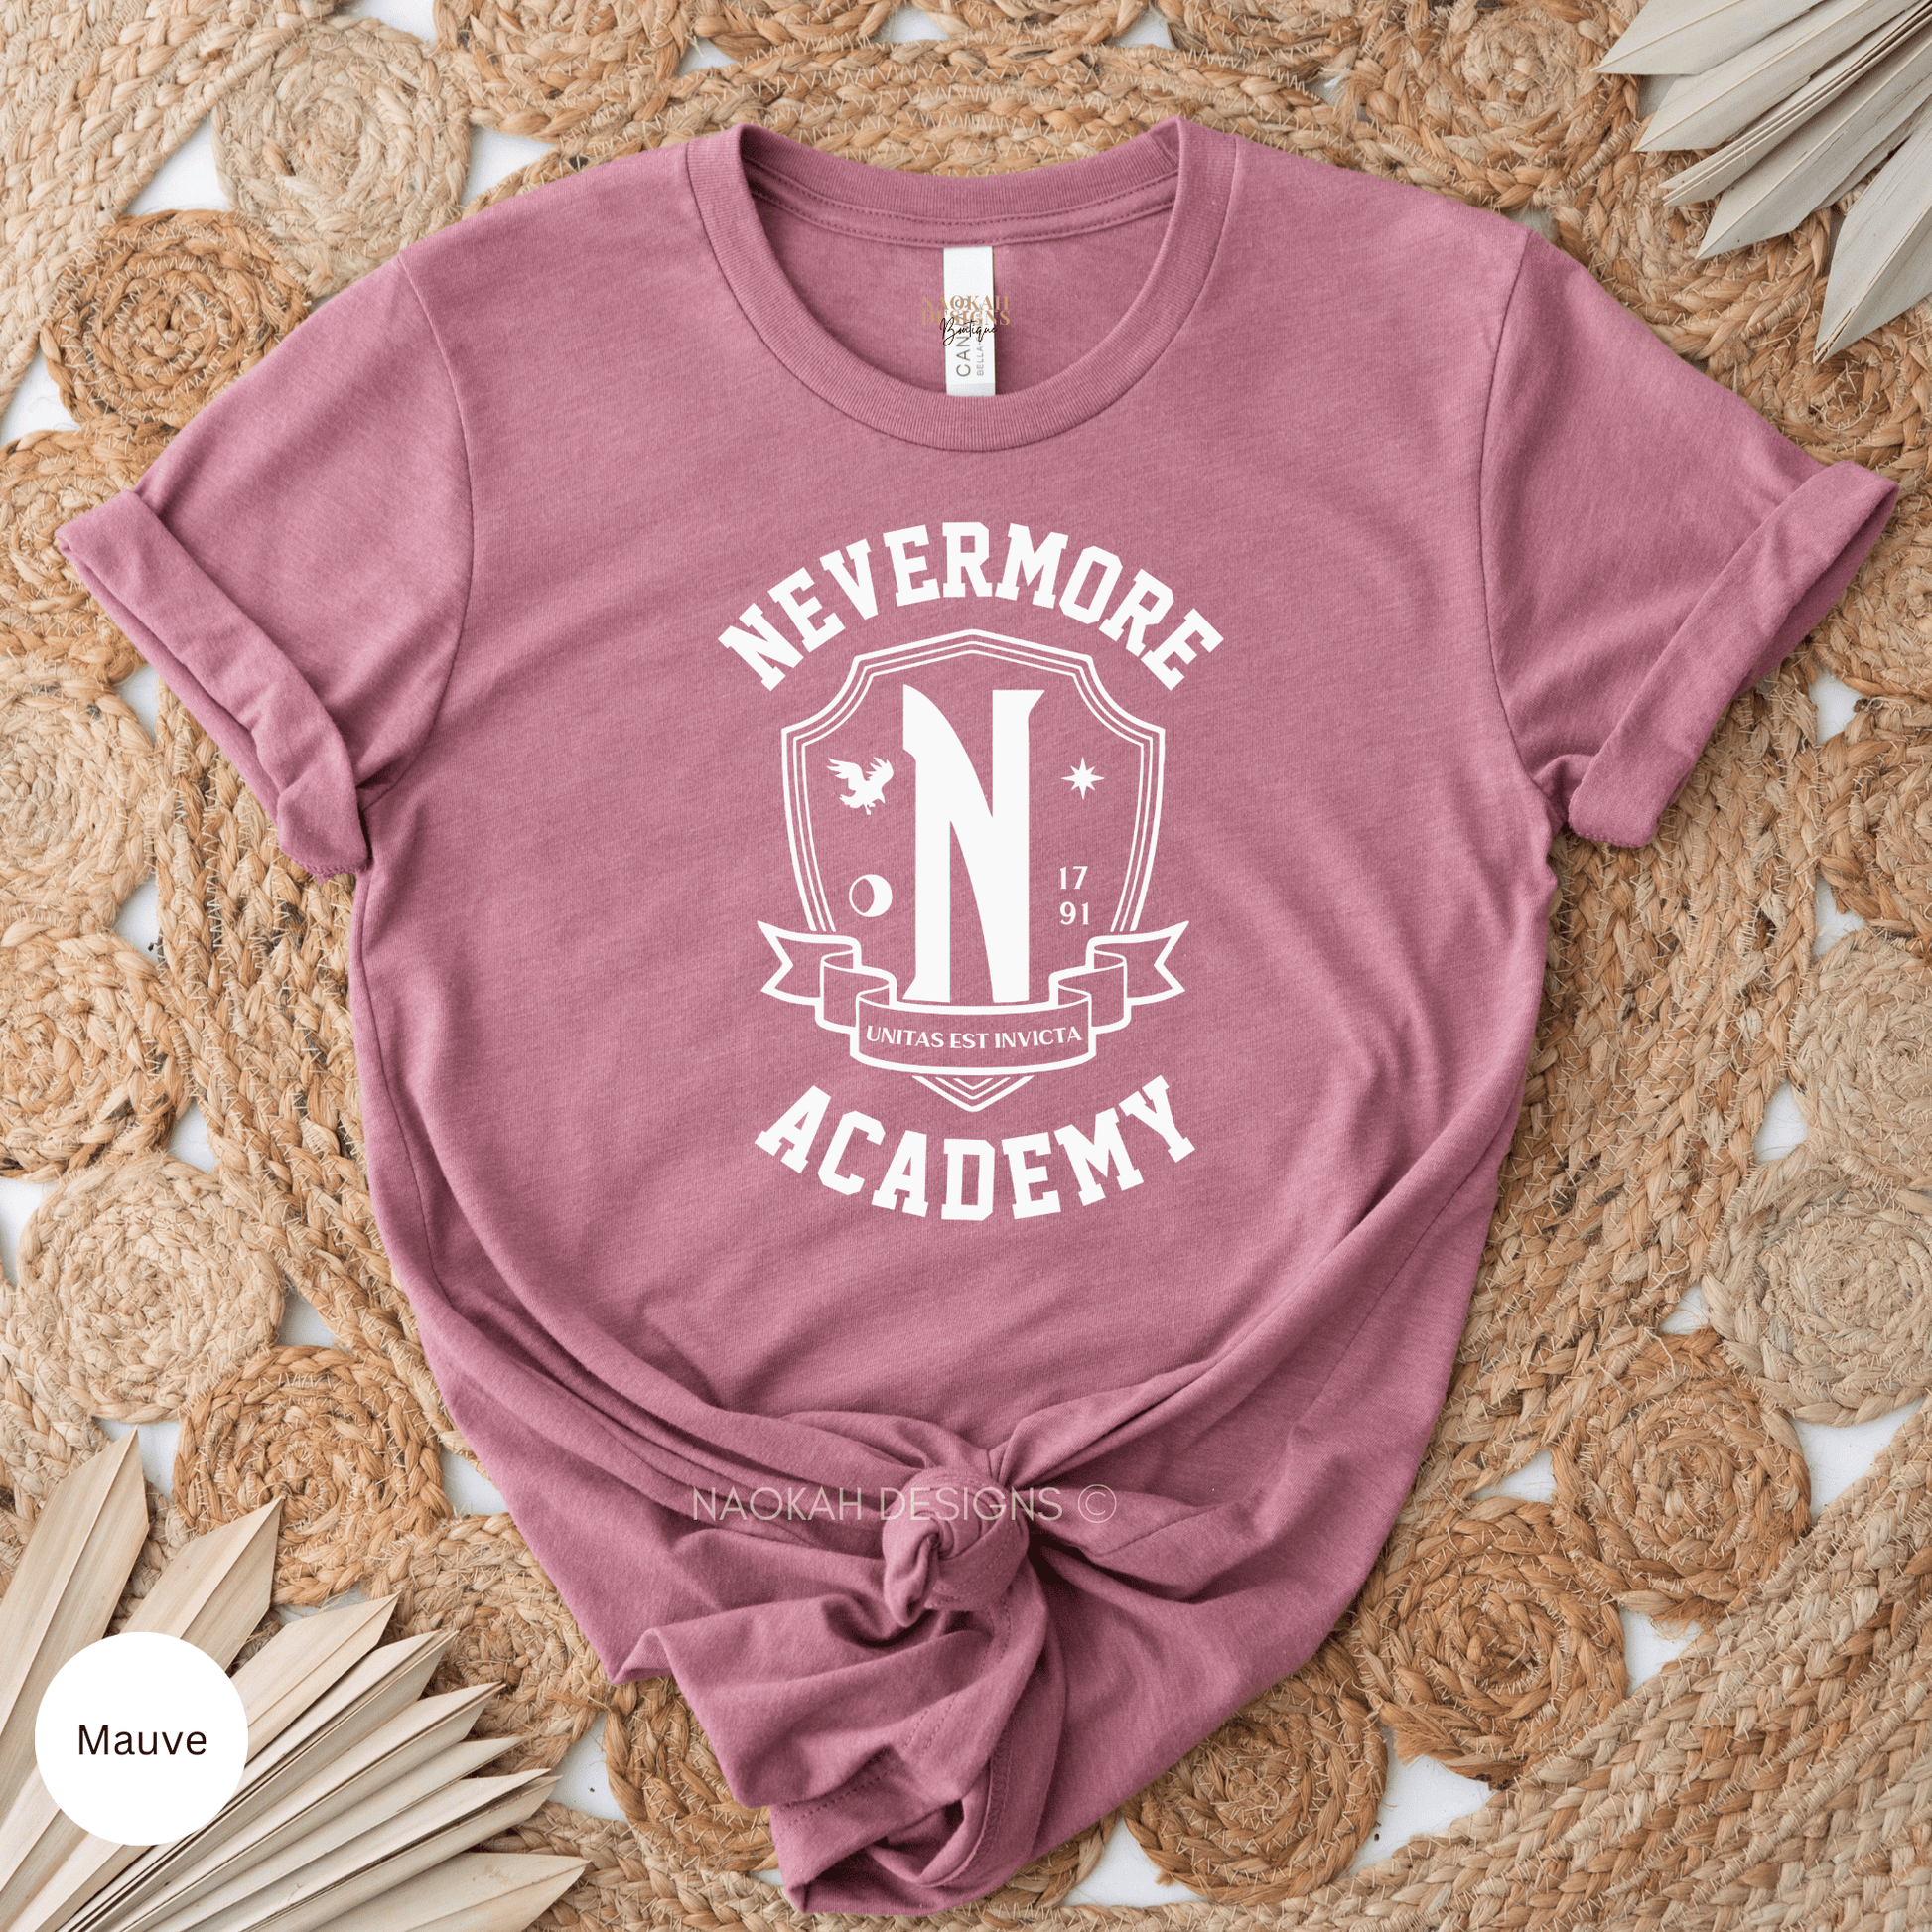 Nevermore Academy 1971 Shirt, Addams family Sweatshirt, Wednesday Addams , Wednesday Adams, Wednesday Addams dancing, Gothic Shirt